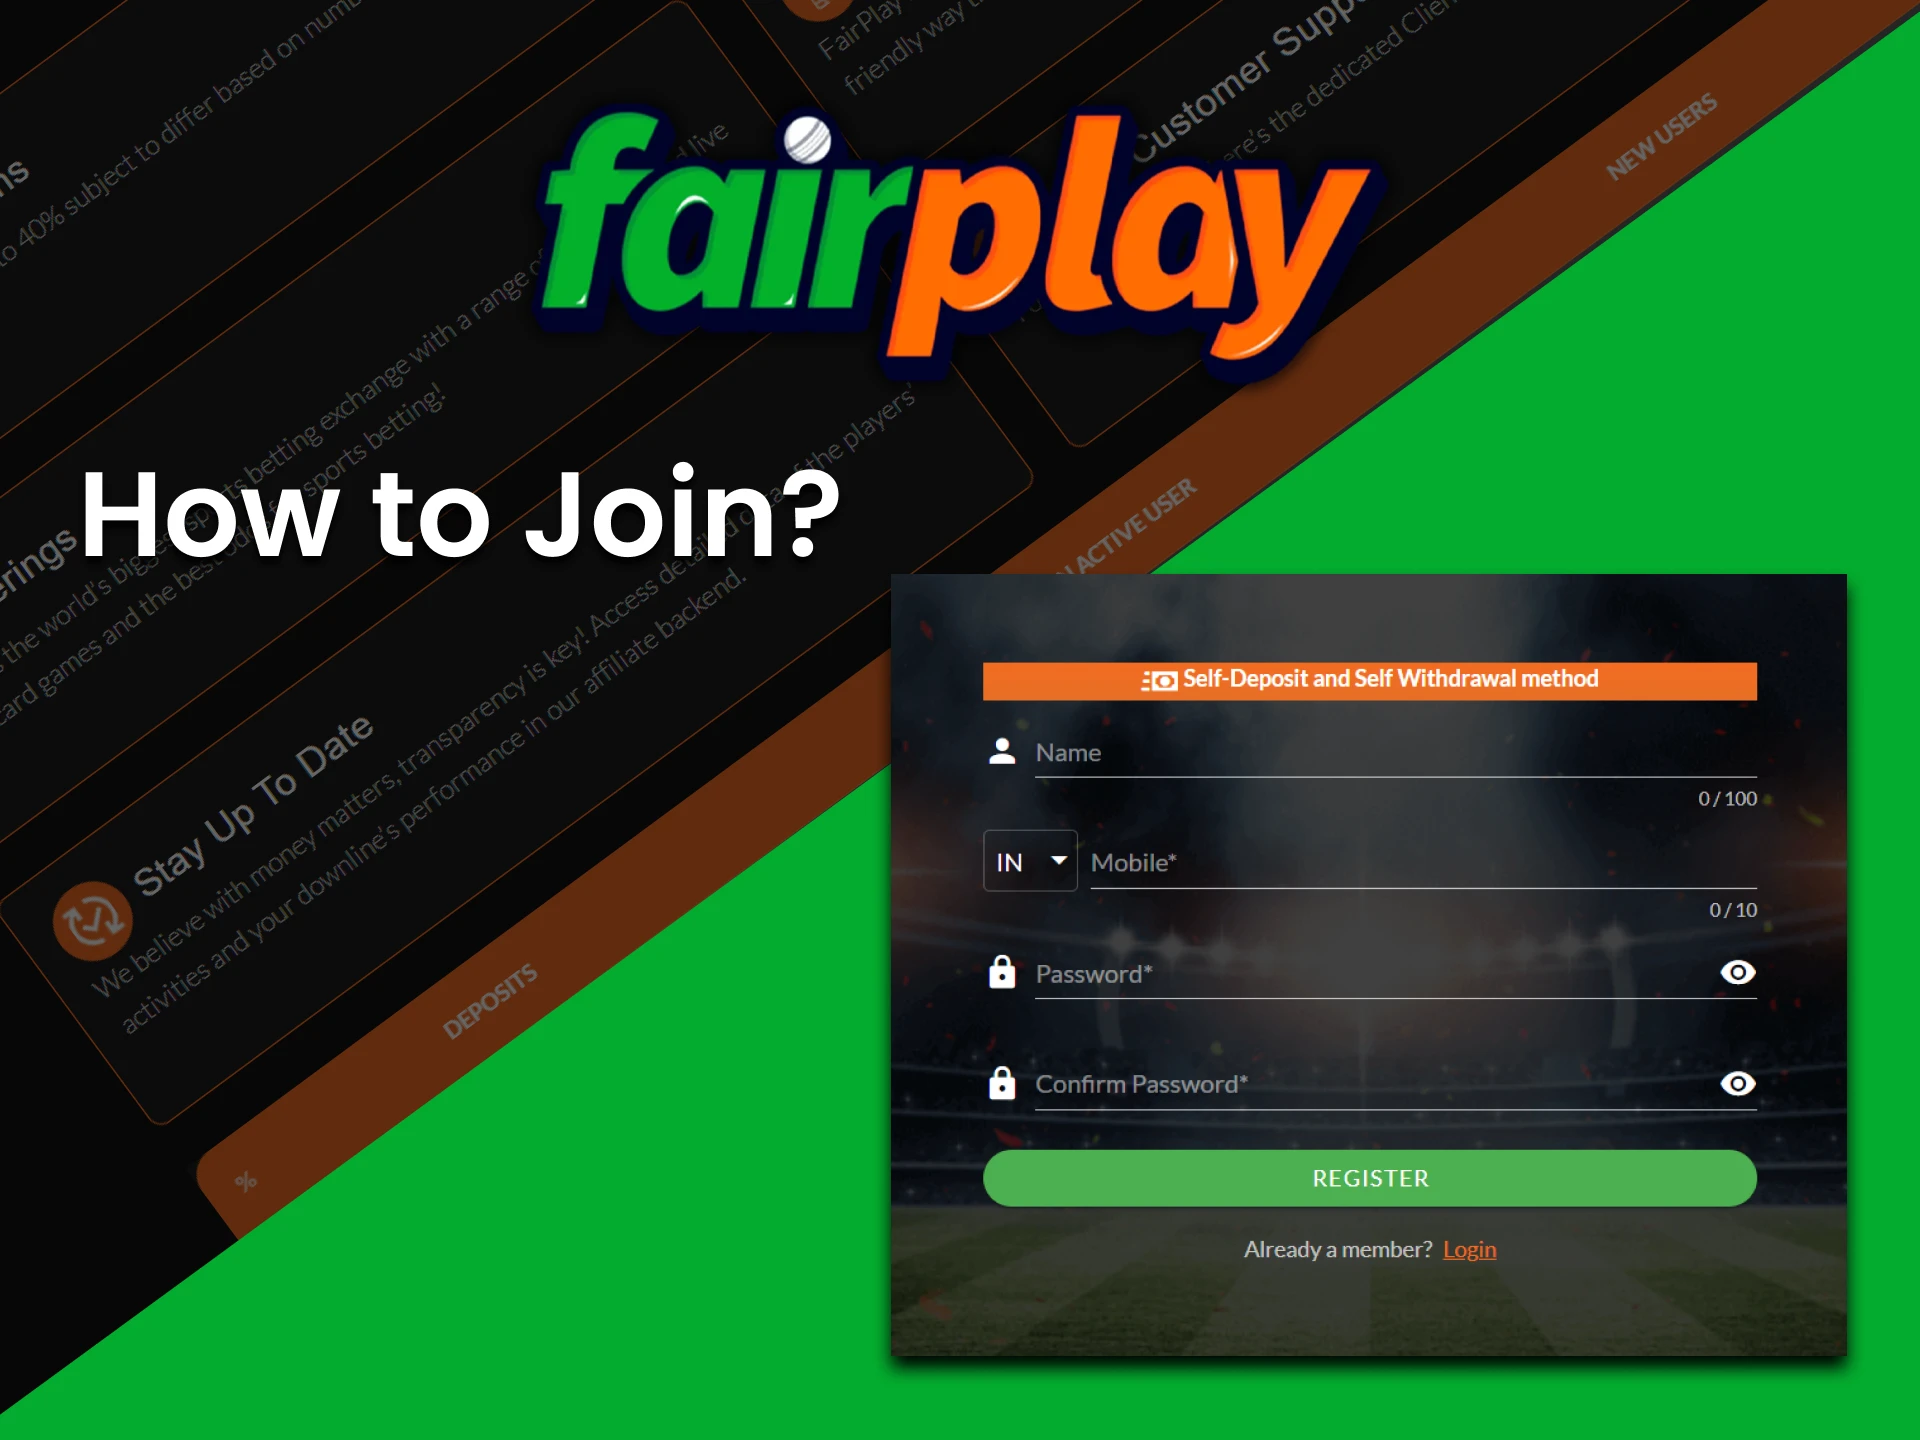 Make new Fairplay account to participate in affiliate program.